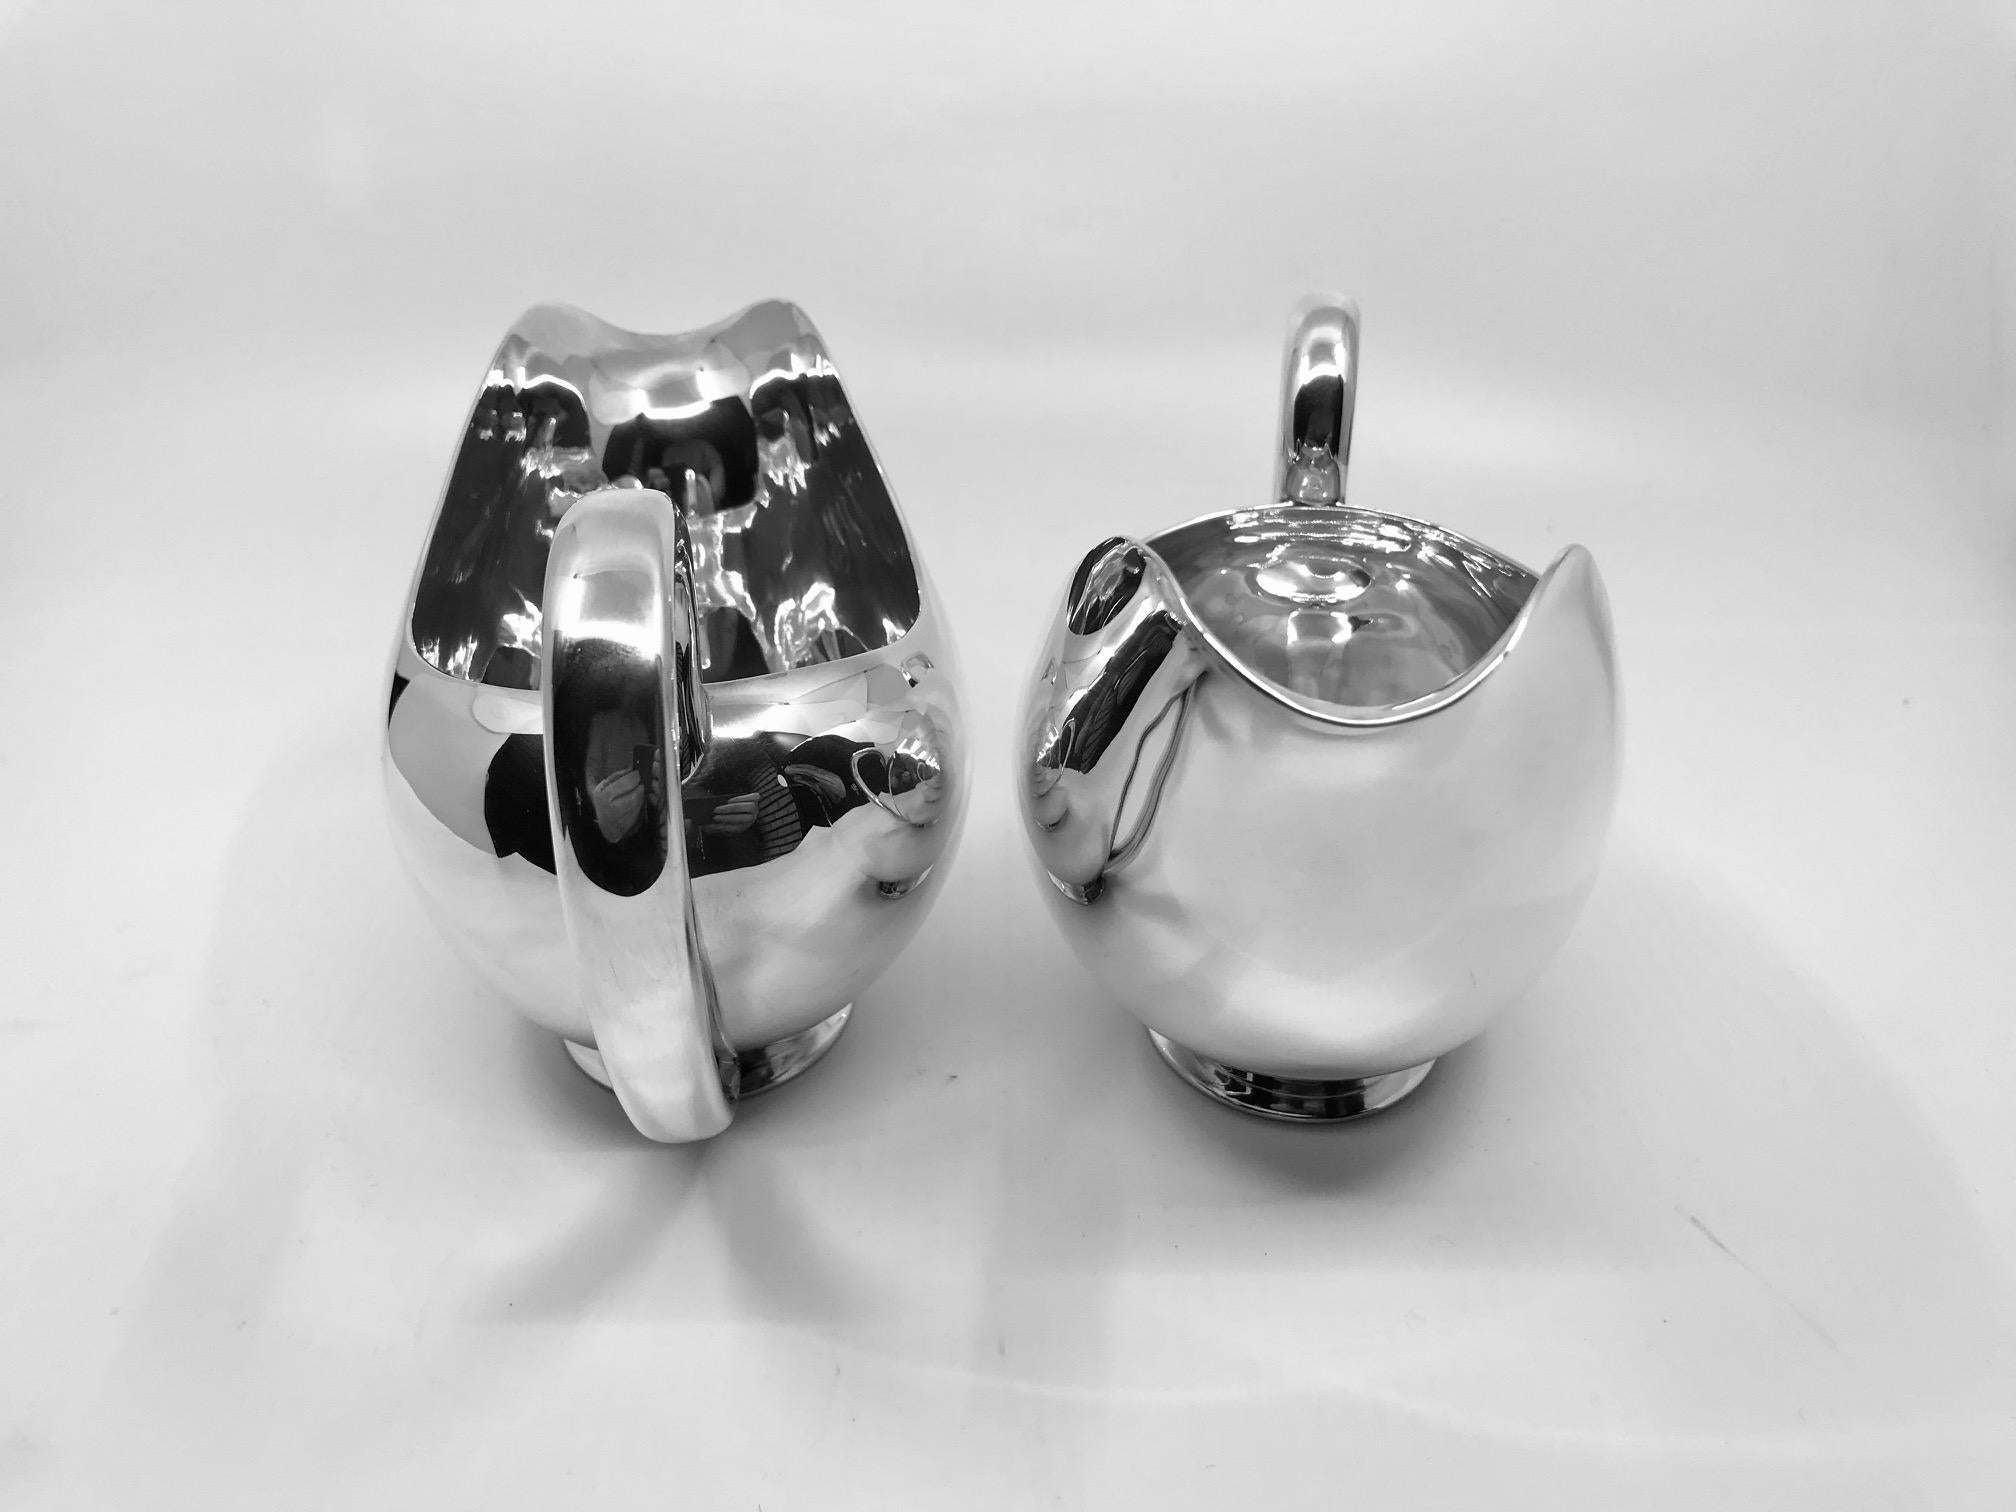 This is a pair of sterling silver sauce boats by purveyors to the Royal Danish Court Anton Michelsen, design from 1927 by Kay Fisker.

Each measures 4 1/4? in height to the top of the spout, 7½” in total length x 3 5/8? across at widest part